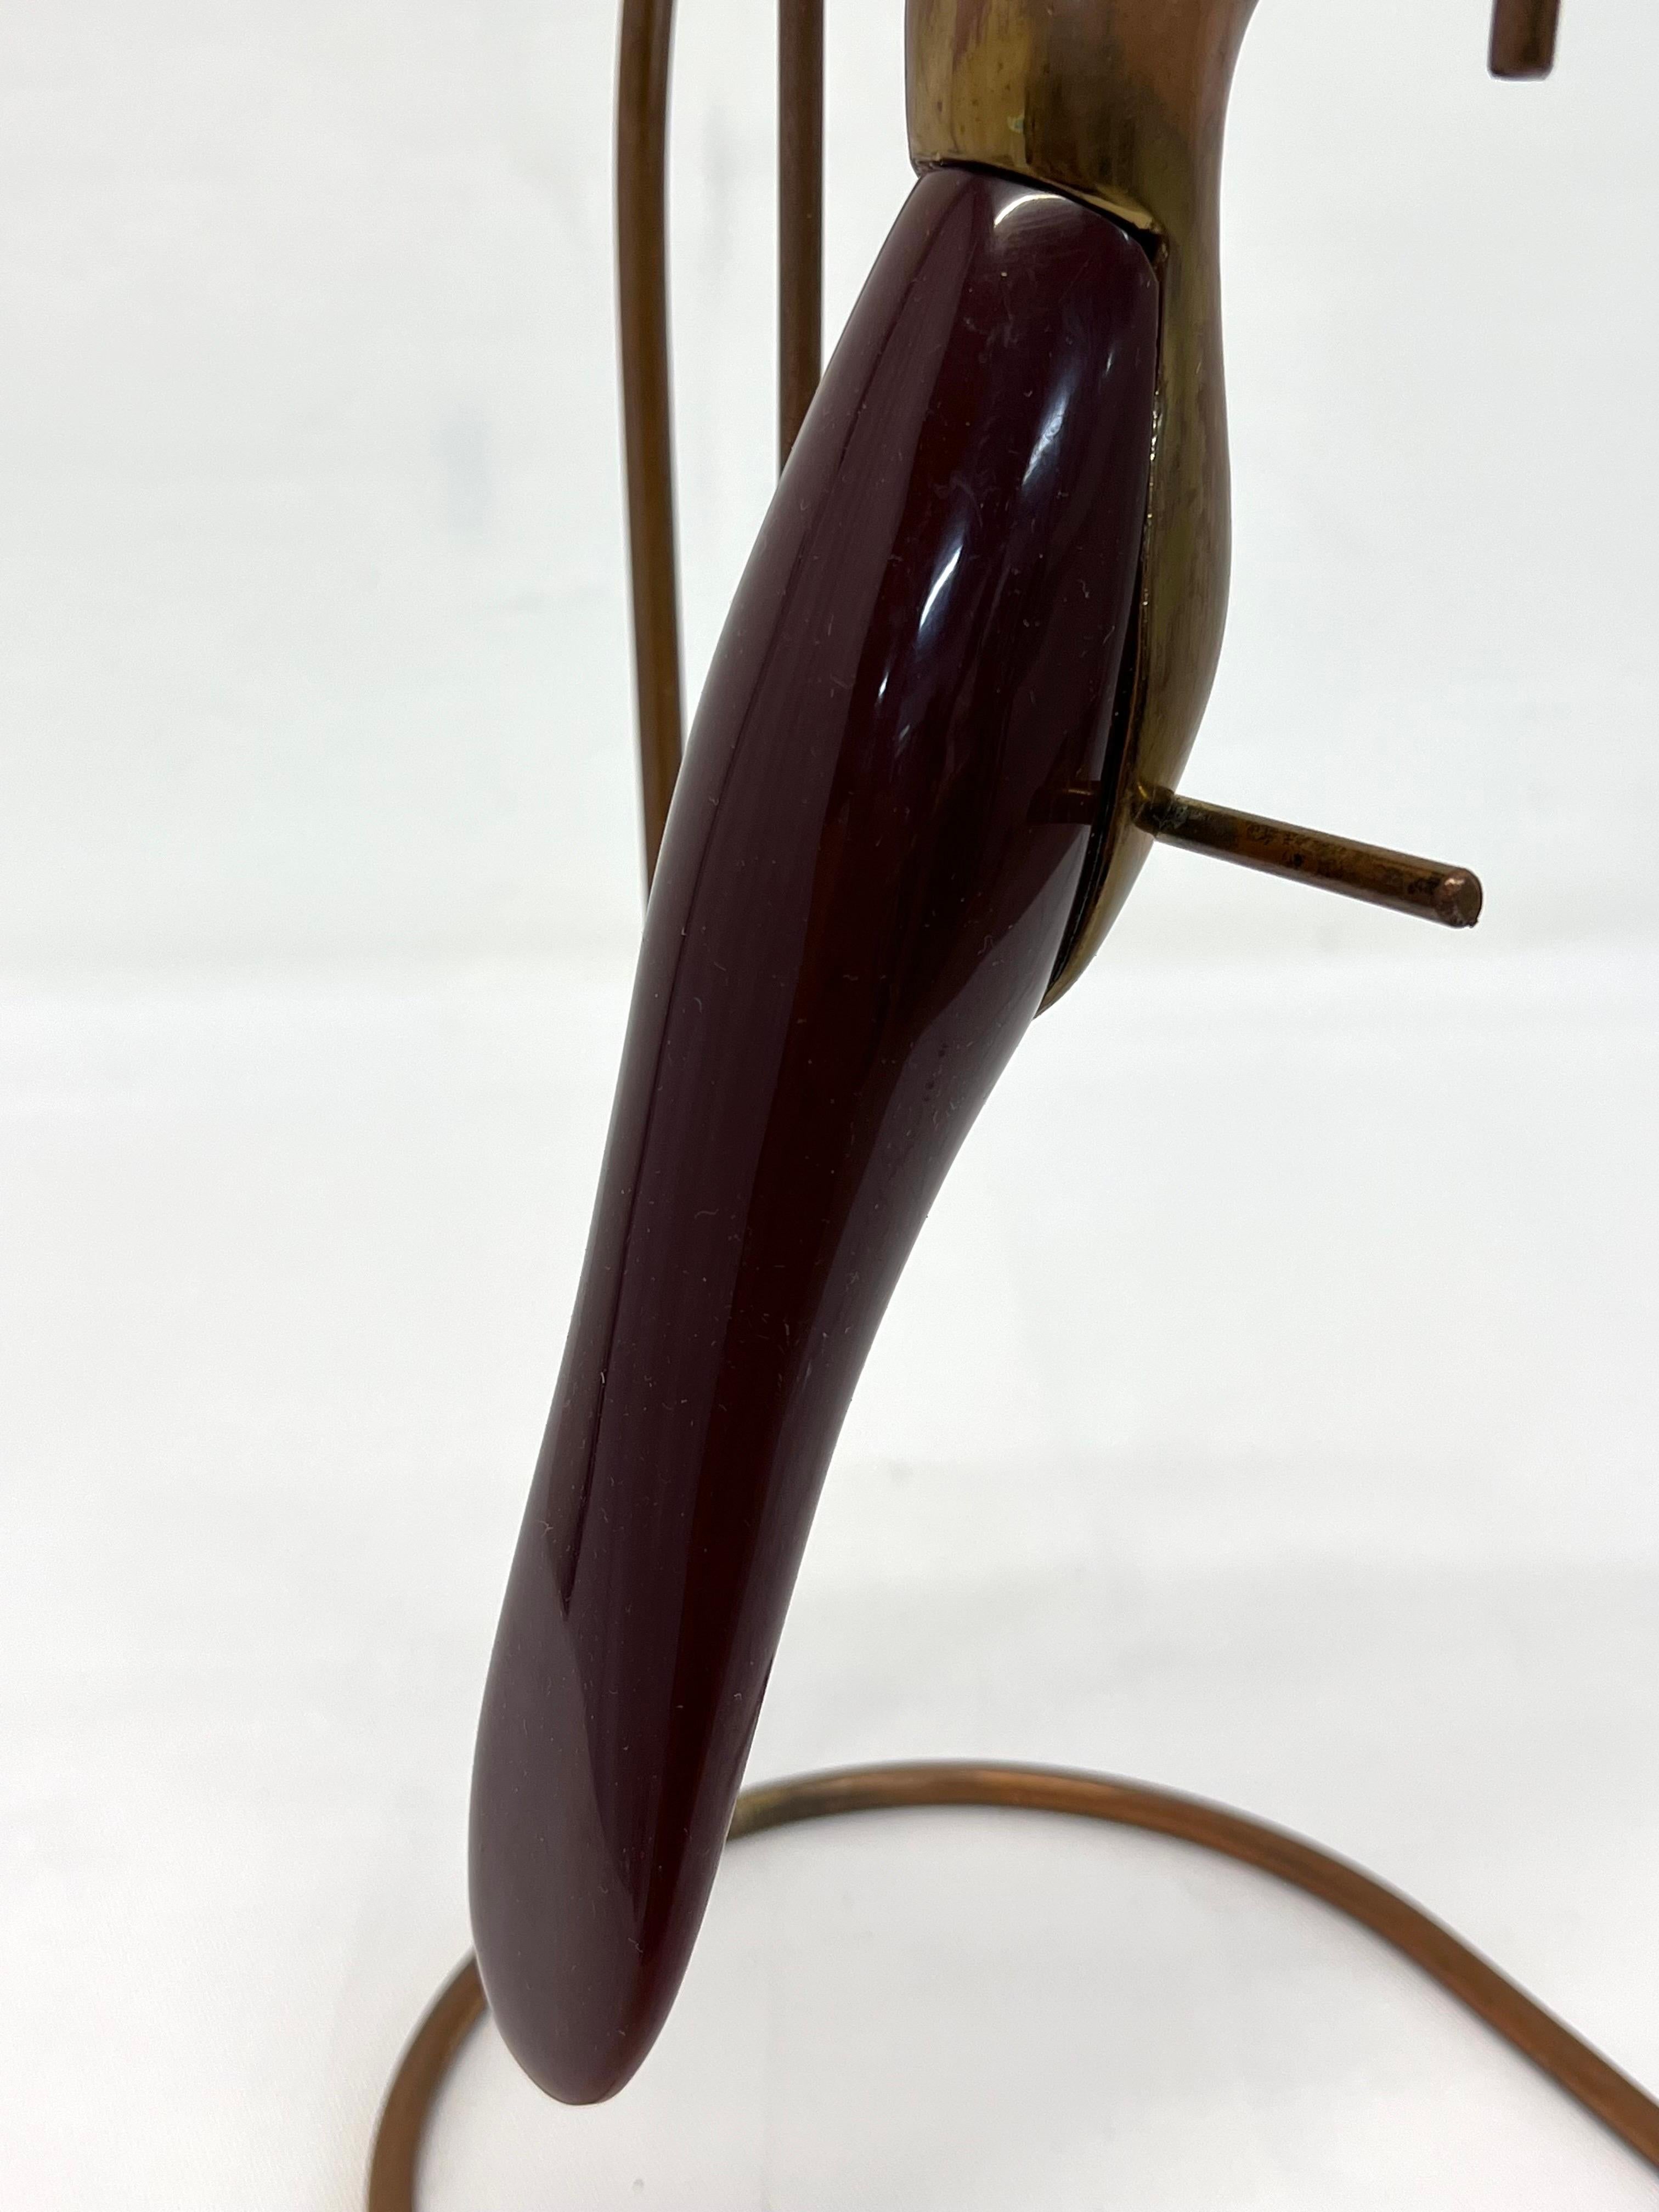 Brazilian Mid-Century Modern Brass and Resin Toucan on Stand, 1960s For Sale 6